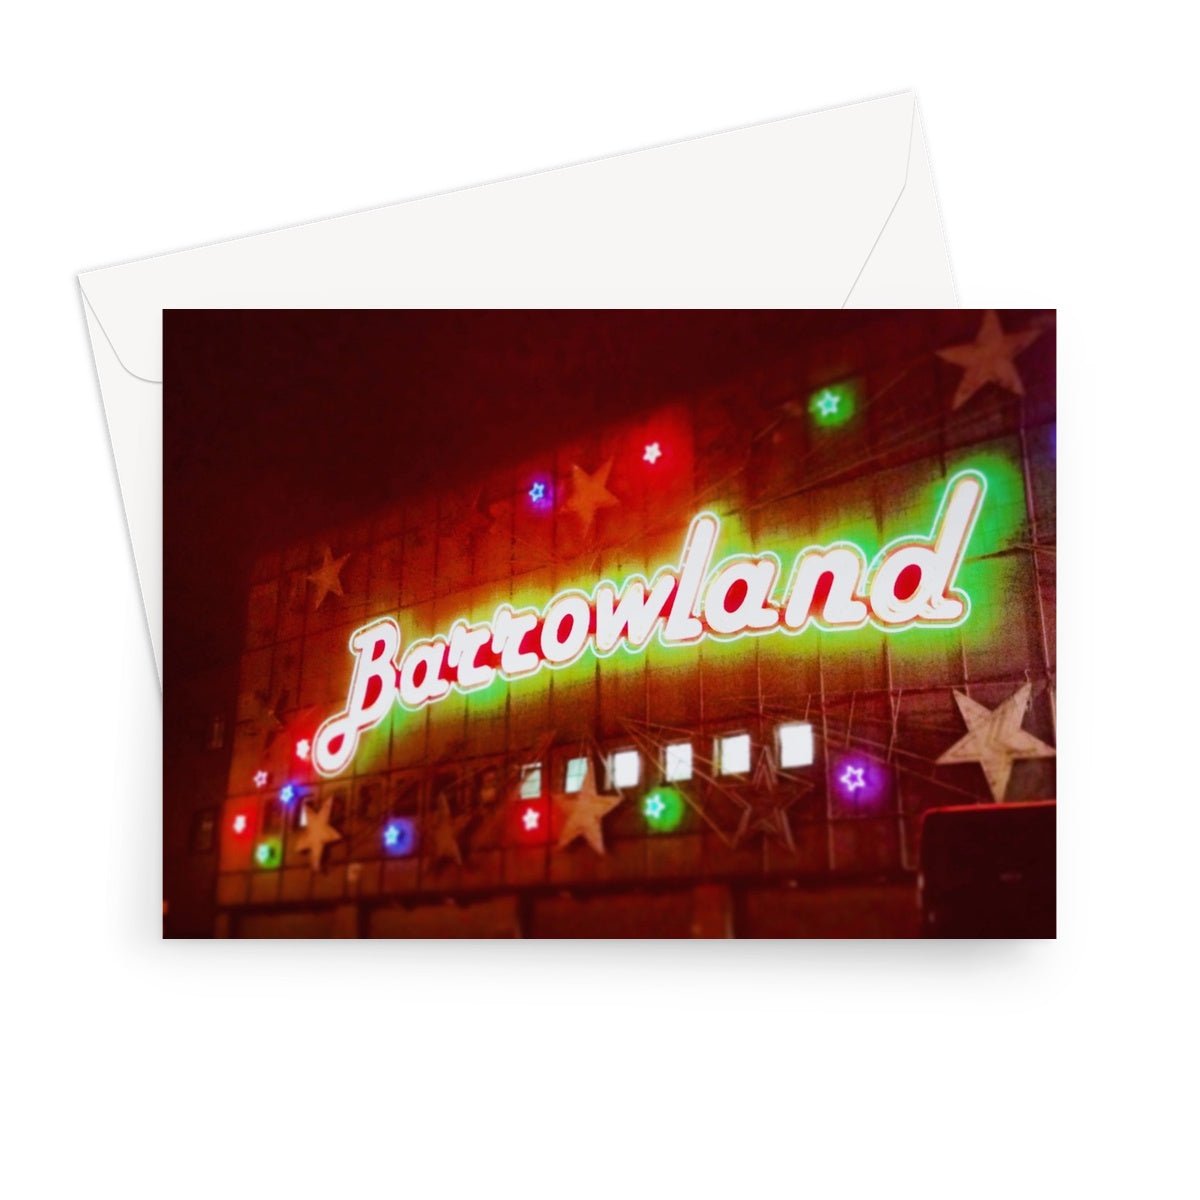 A Neon Glasgow Barrowlands Art Gifts Greeting Card-Greetings Cards-Edinburgh & Glasgow Art Gallery-7"x5"-1 Card-Paintings, Prints, Homeware, Art Gifts From Scotland By Scottish Artist Kevin Hunter